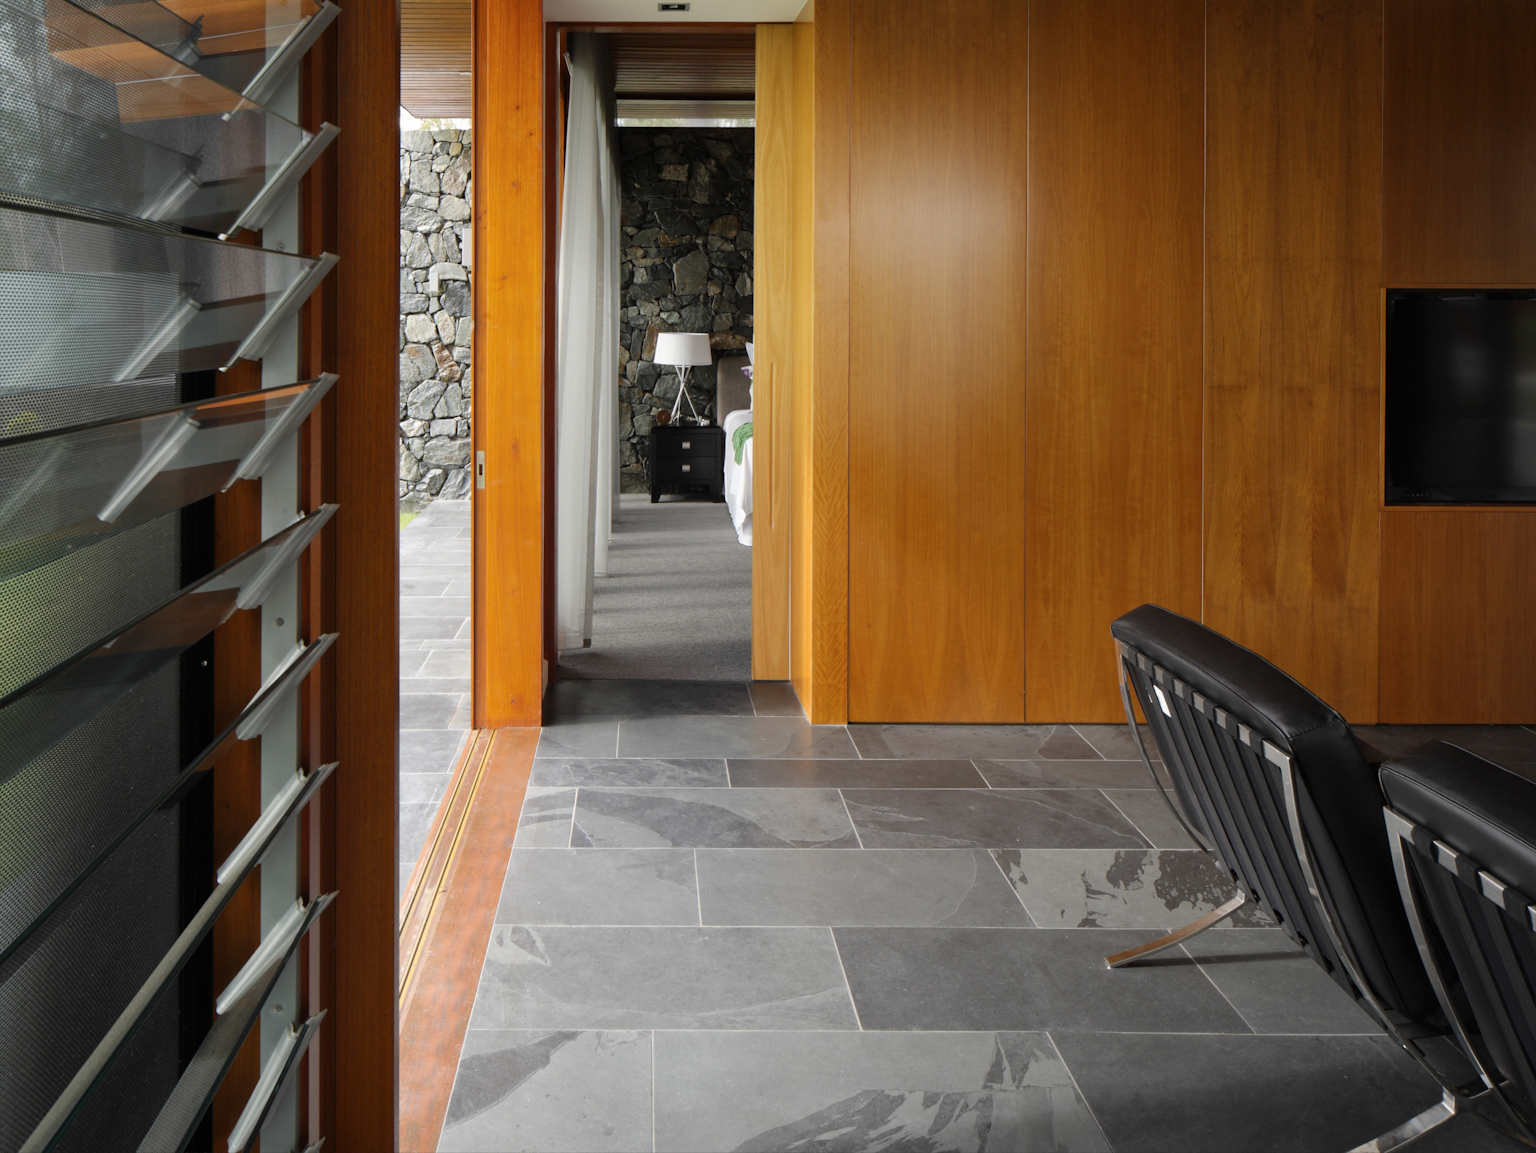 Large format Abyss split stone pavers used as internal flooring with wooden features